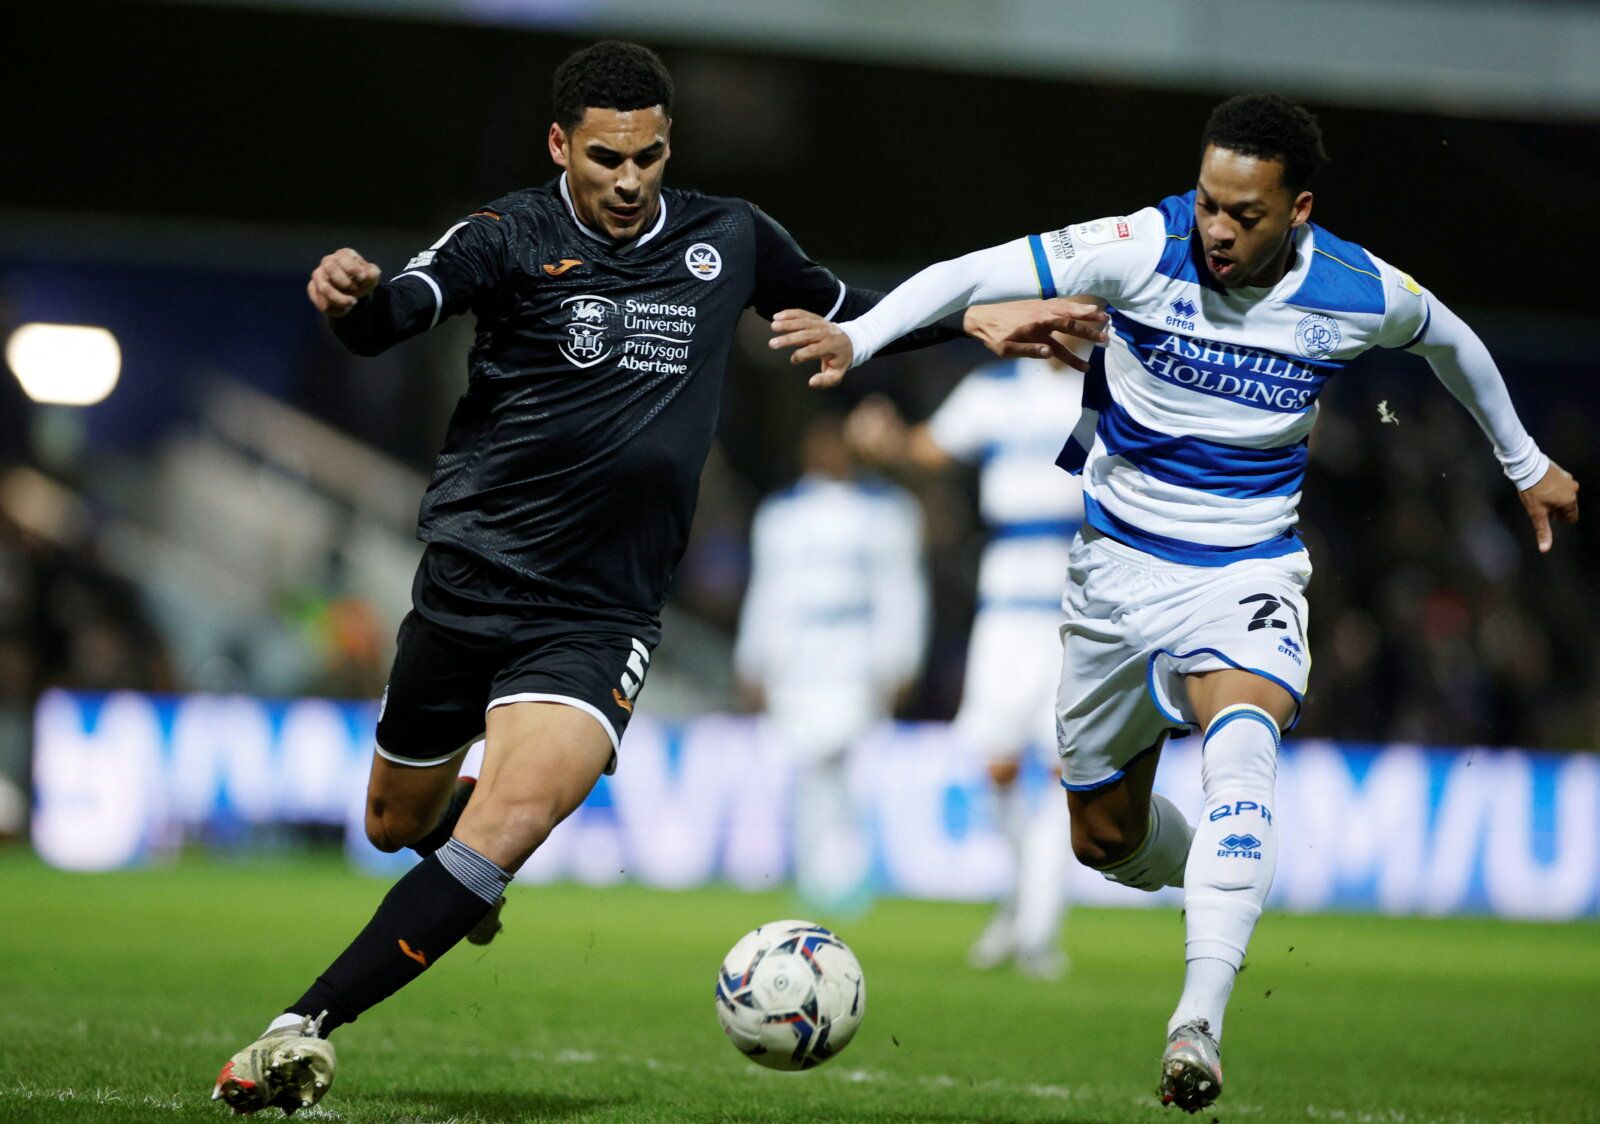 Soccer Football - Championship - Queens Park Rangers v Swansea City - Loftus Road, London, Britain - January 25, 2022 Swansea City's Ben Cabango in action with Queens Park Rangers' Chris Willock  Action Images/John Sibley  EDITORIAL USE ONLY. No use with unauthorized audio, video, data, fixture lists, club/league logos or 